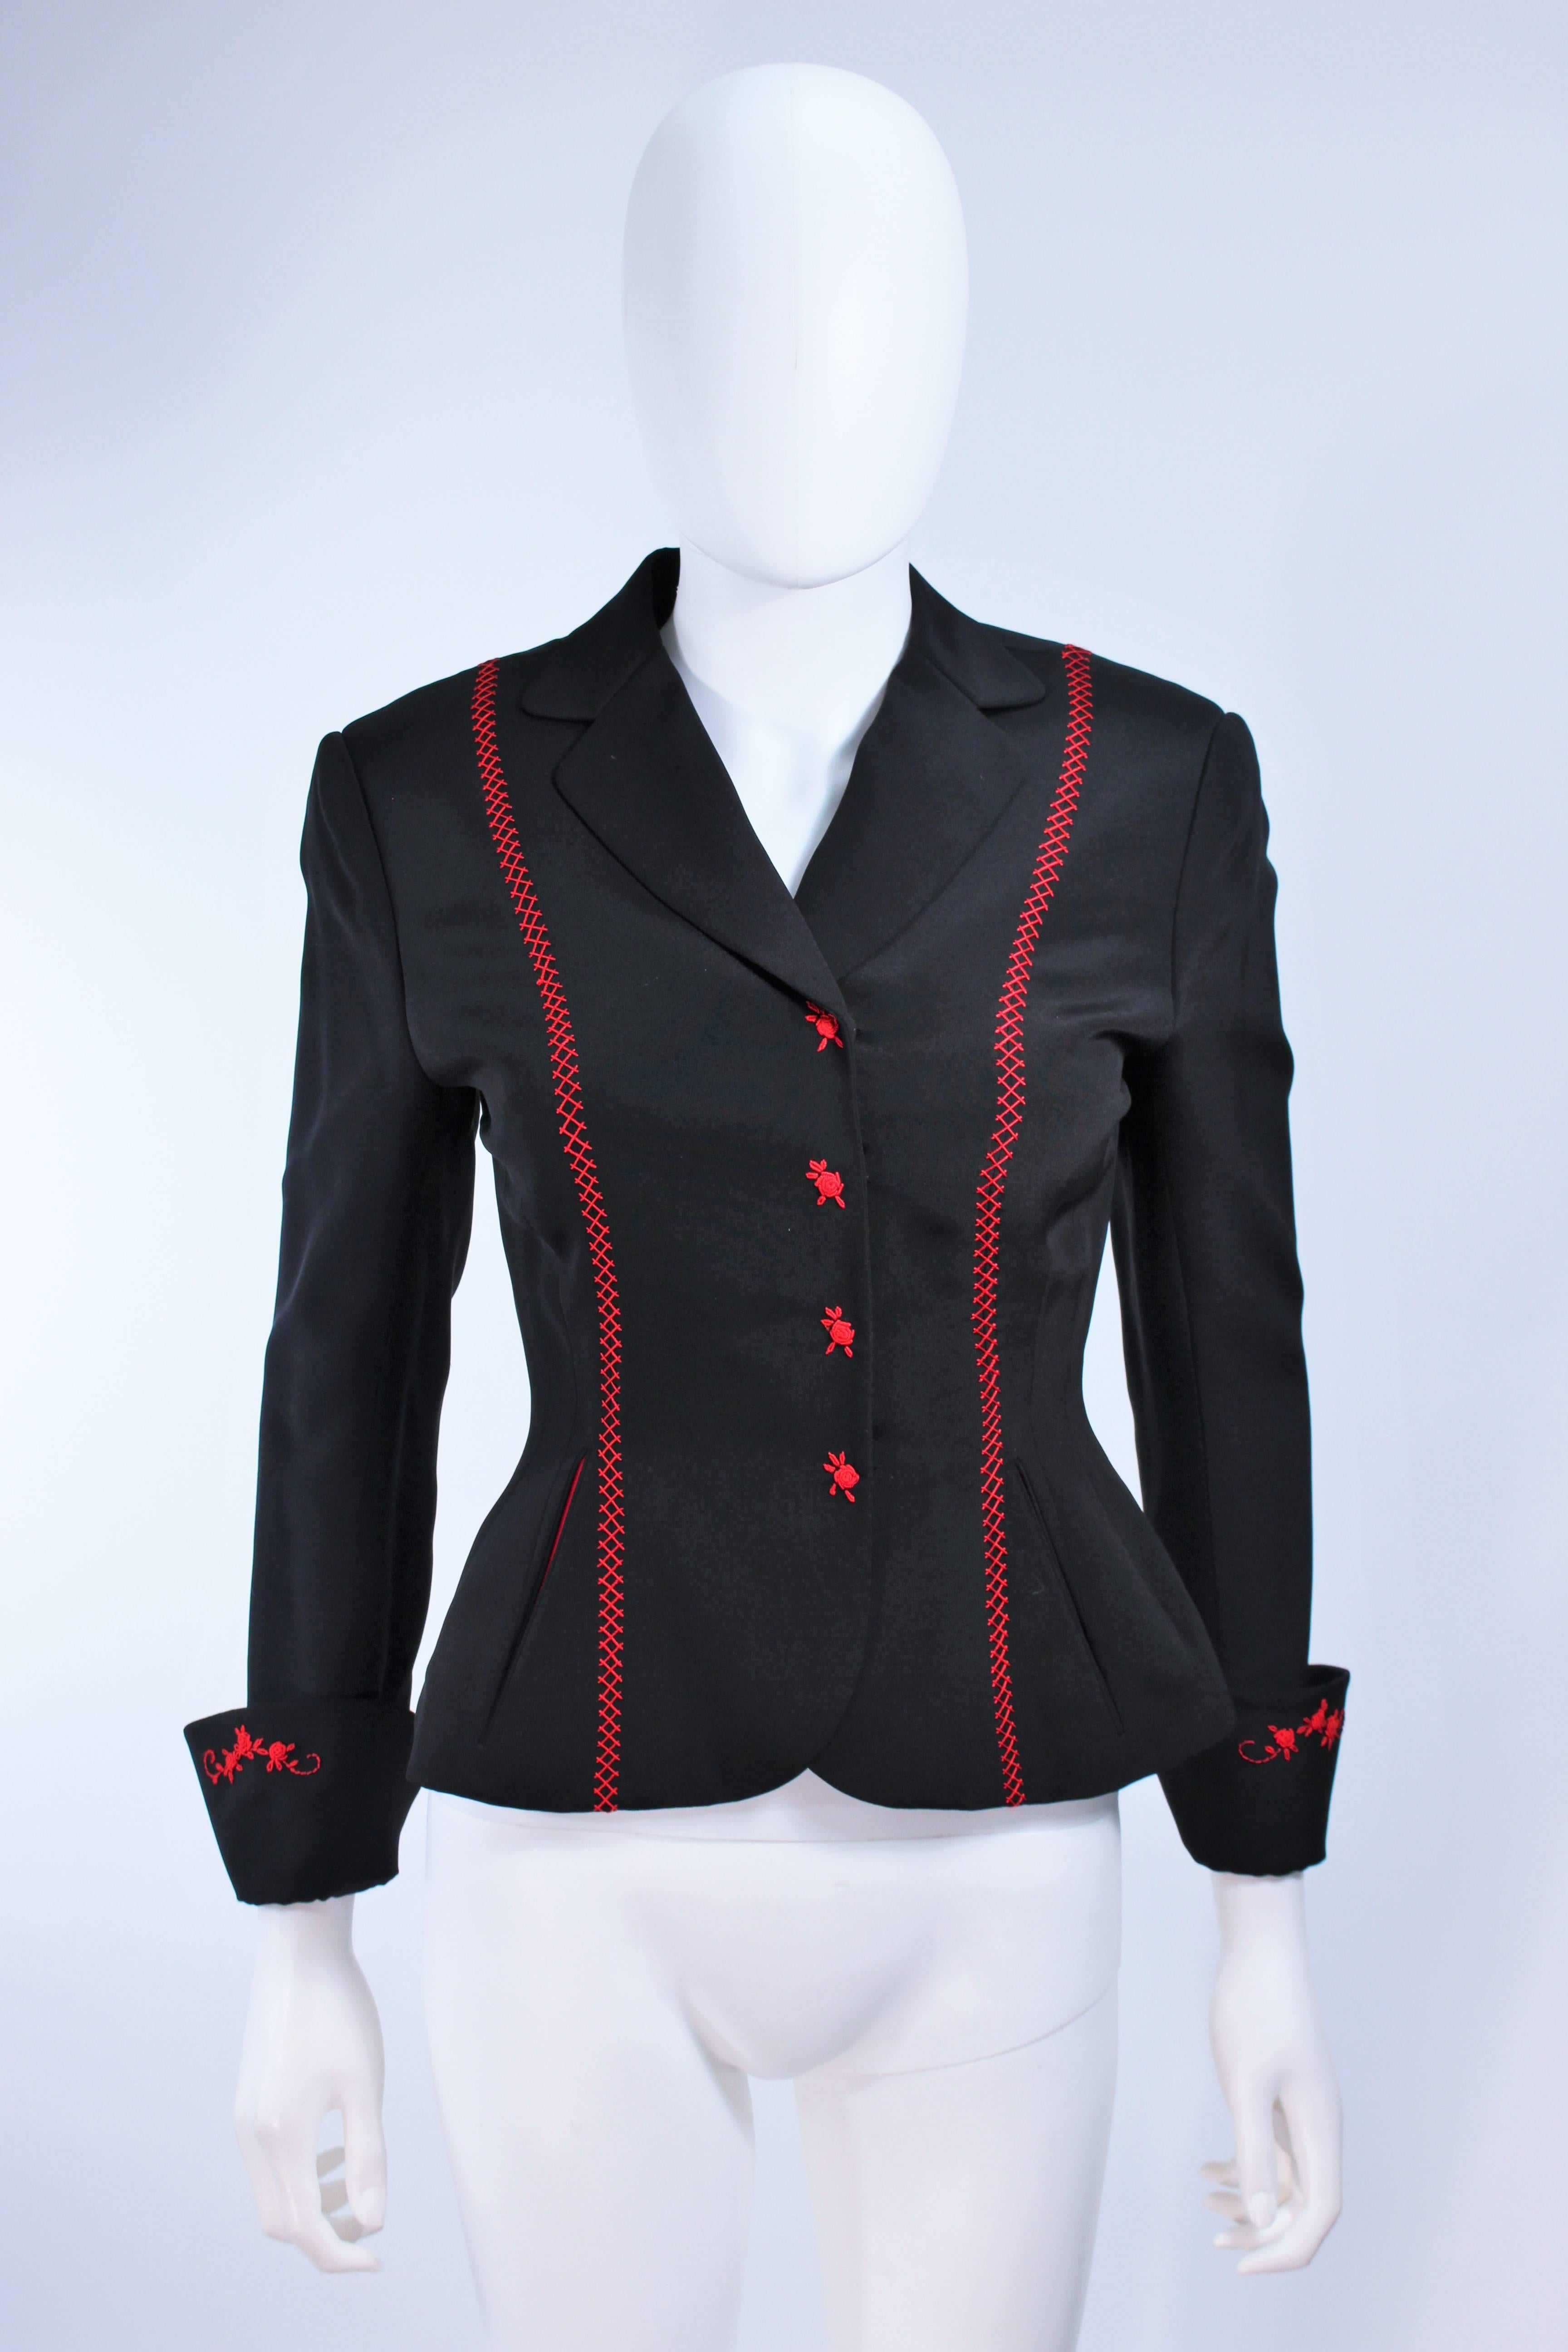 This jacket is composed of a black fabric with red top-stitch. Features center front snap closures with red rose embroidered design. In excellent vintage condition.

**Please cross-reference measurements for personal accuracy. Size in description